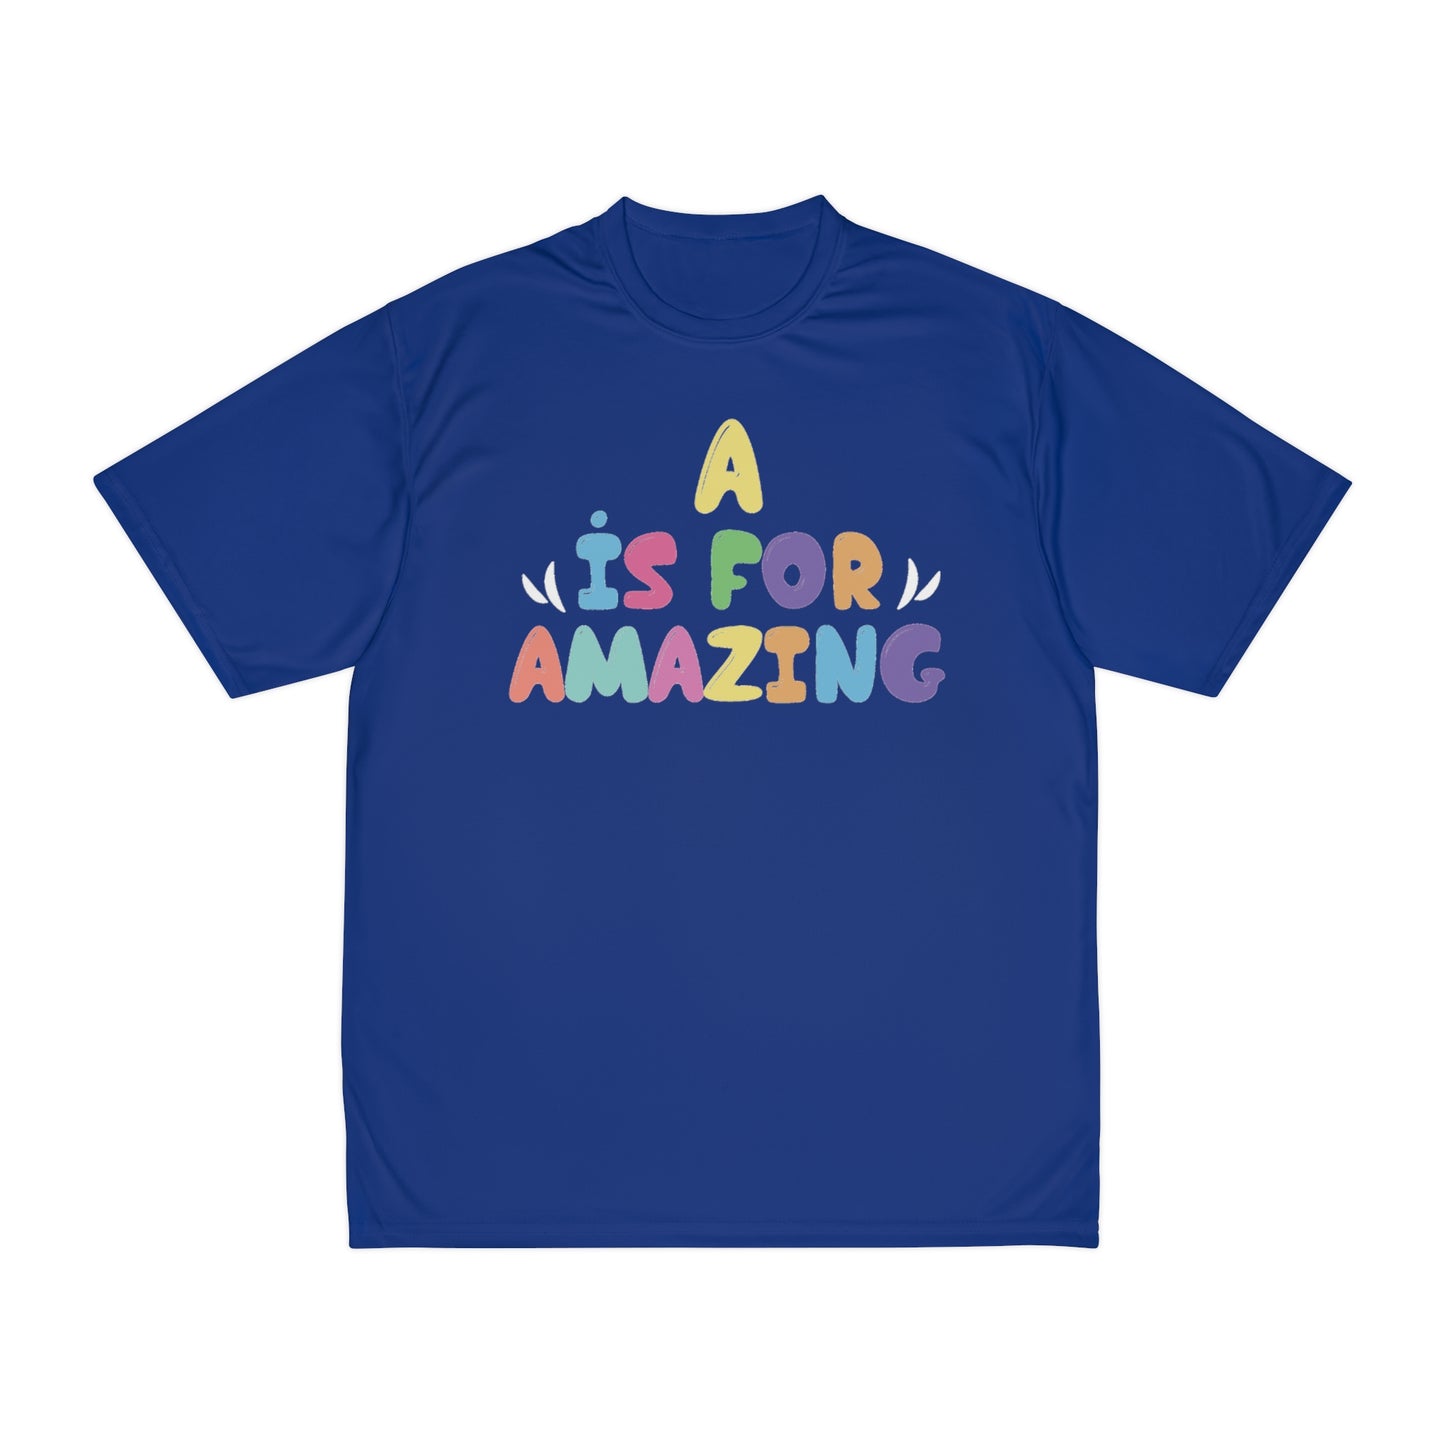 A is For Amazing Men's Performance T-Shirt, Amazing shirts, Inspirational shirts, Motivational Shirts, Positive shirts, Trendy tees